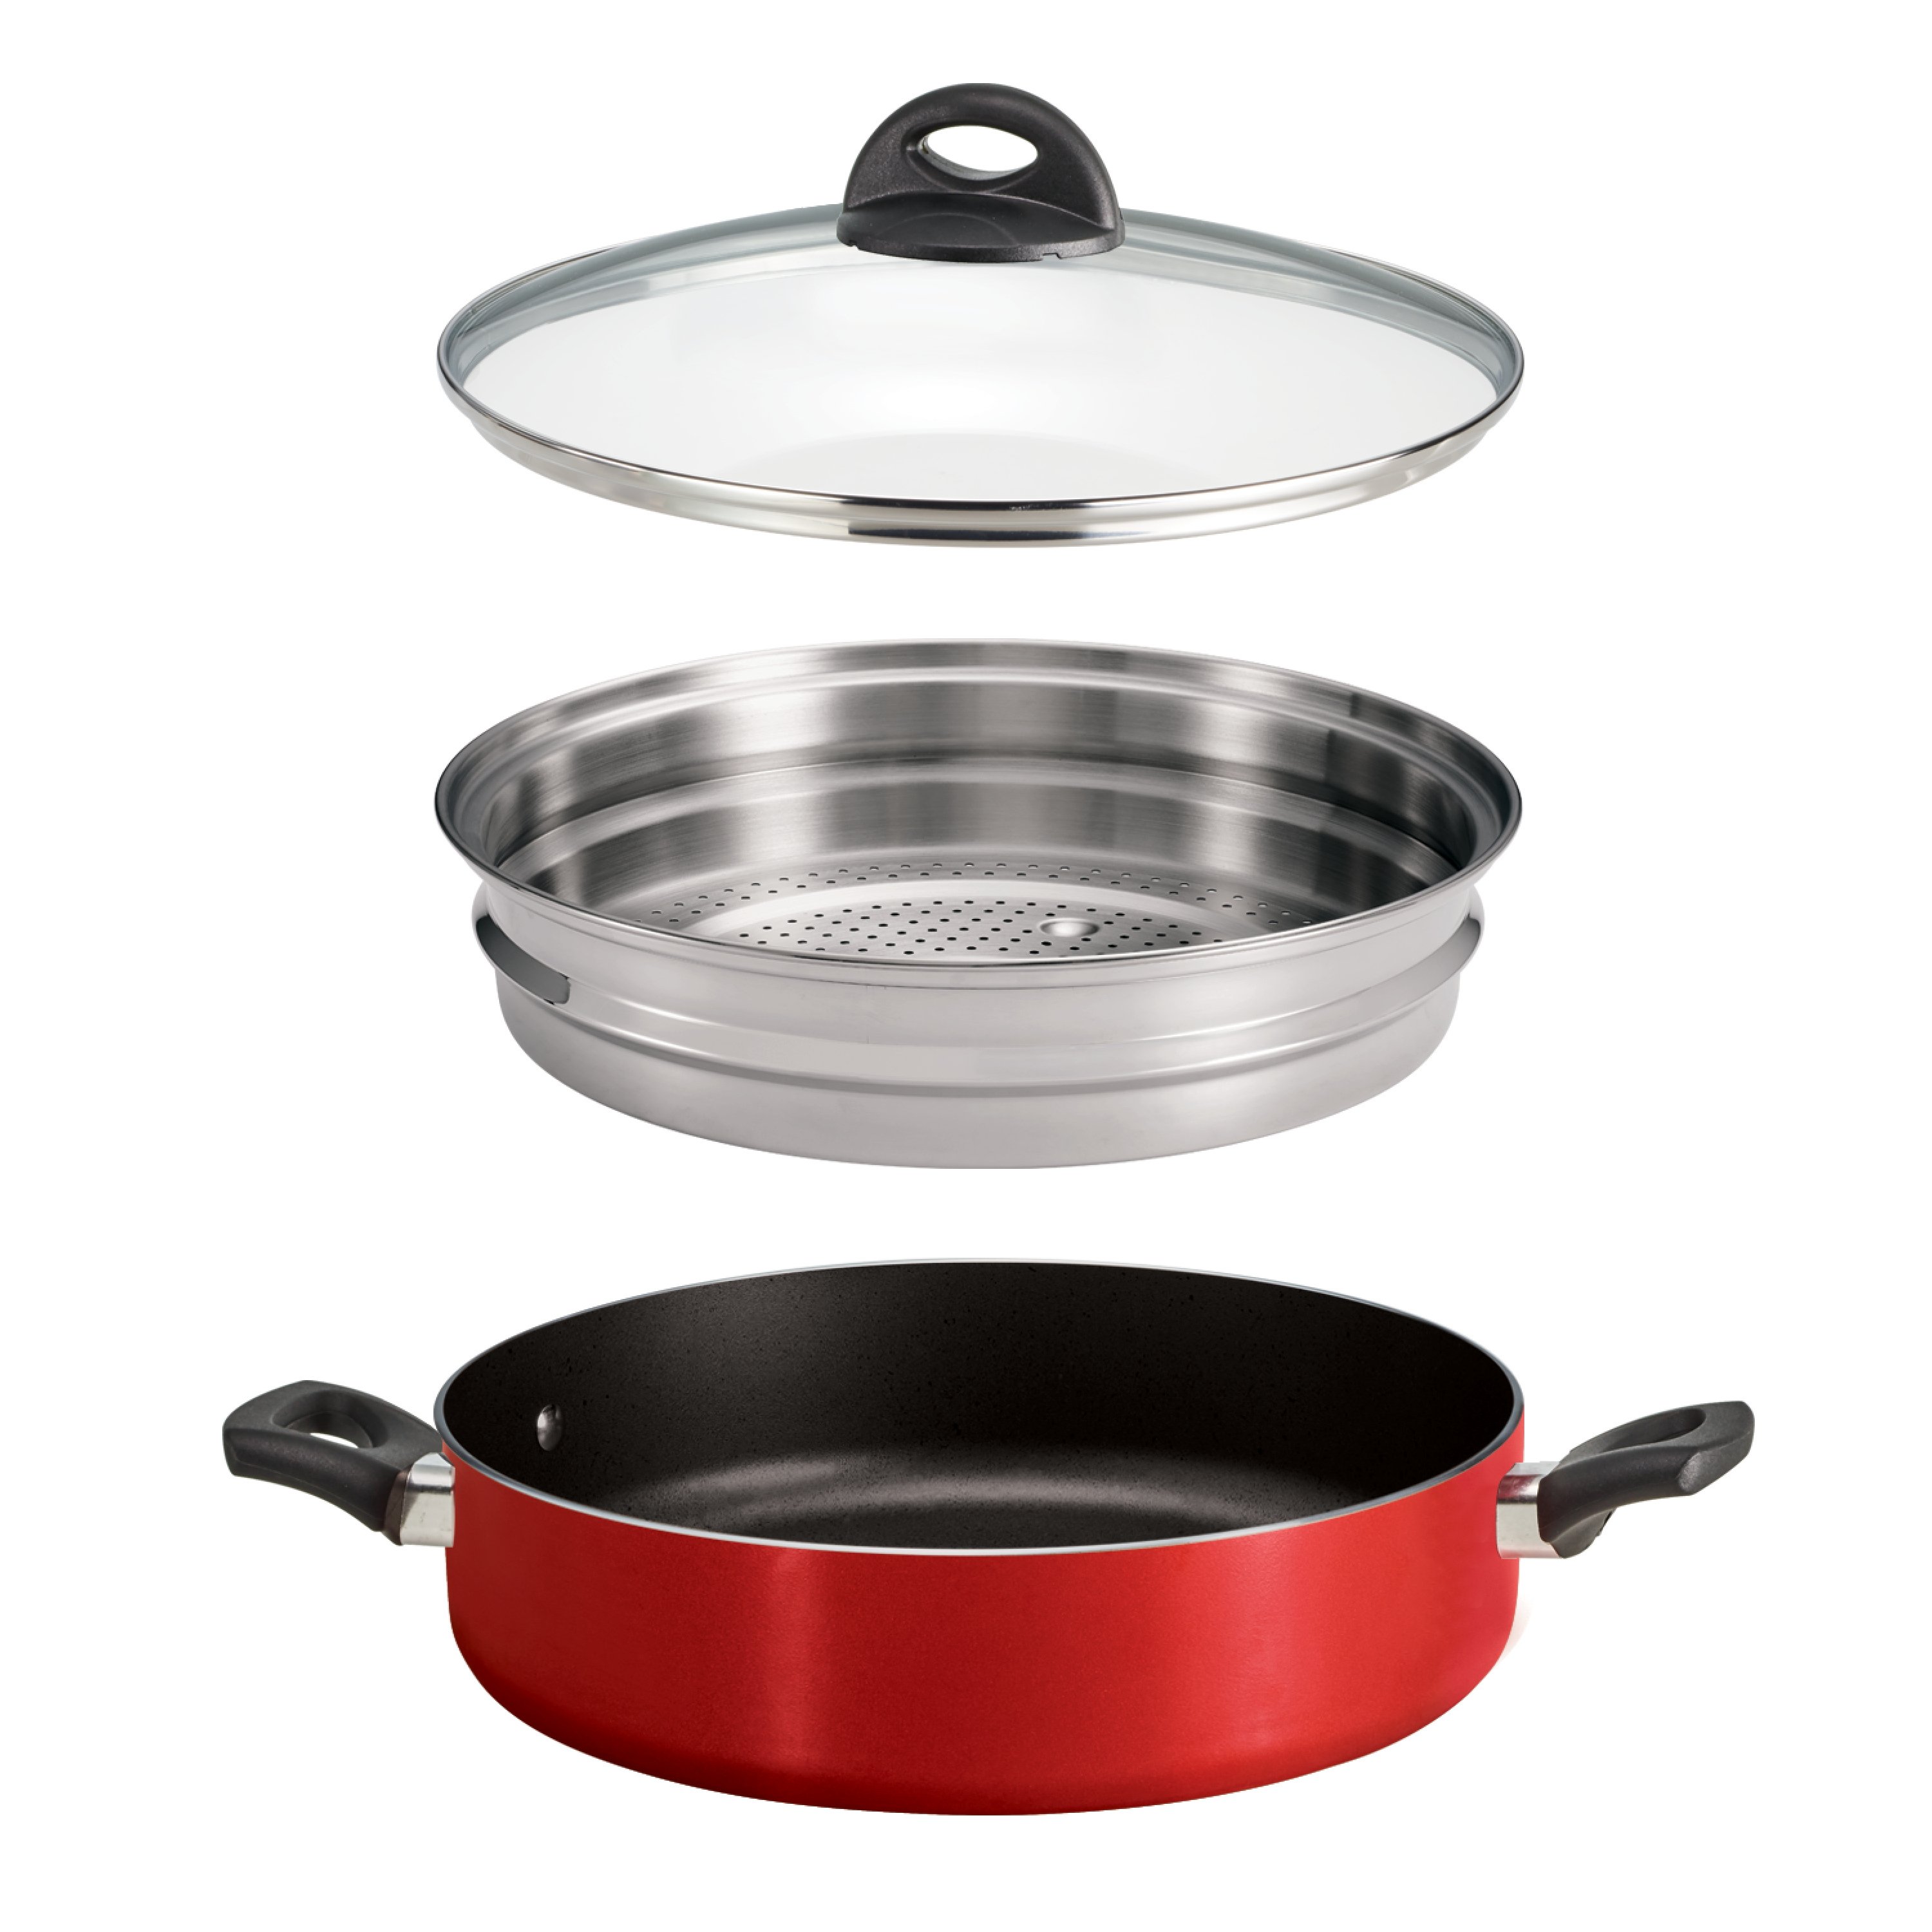 Tramontina Non-Stick Red Covered Pan with Steamer Insert - Shop